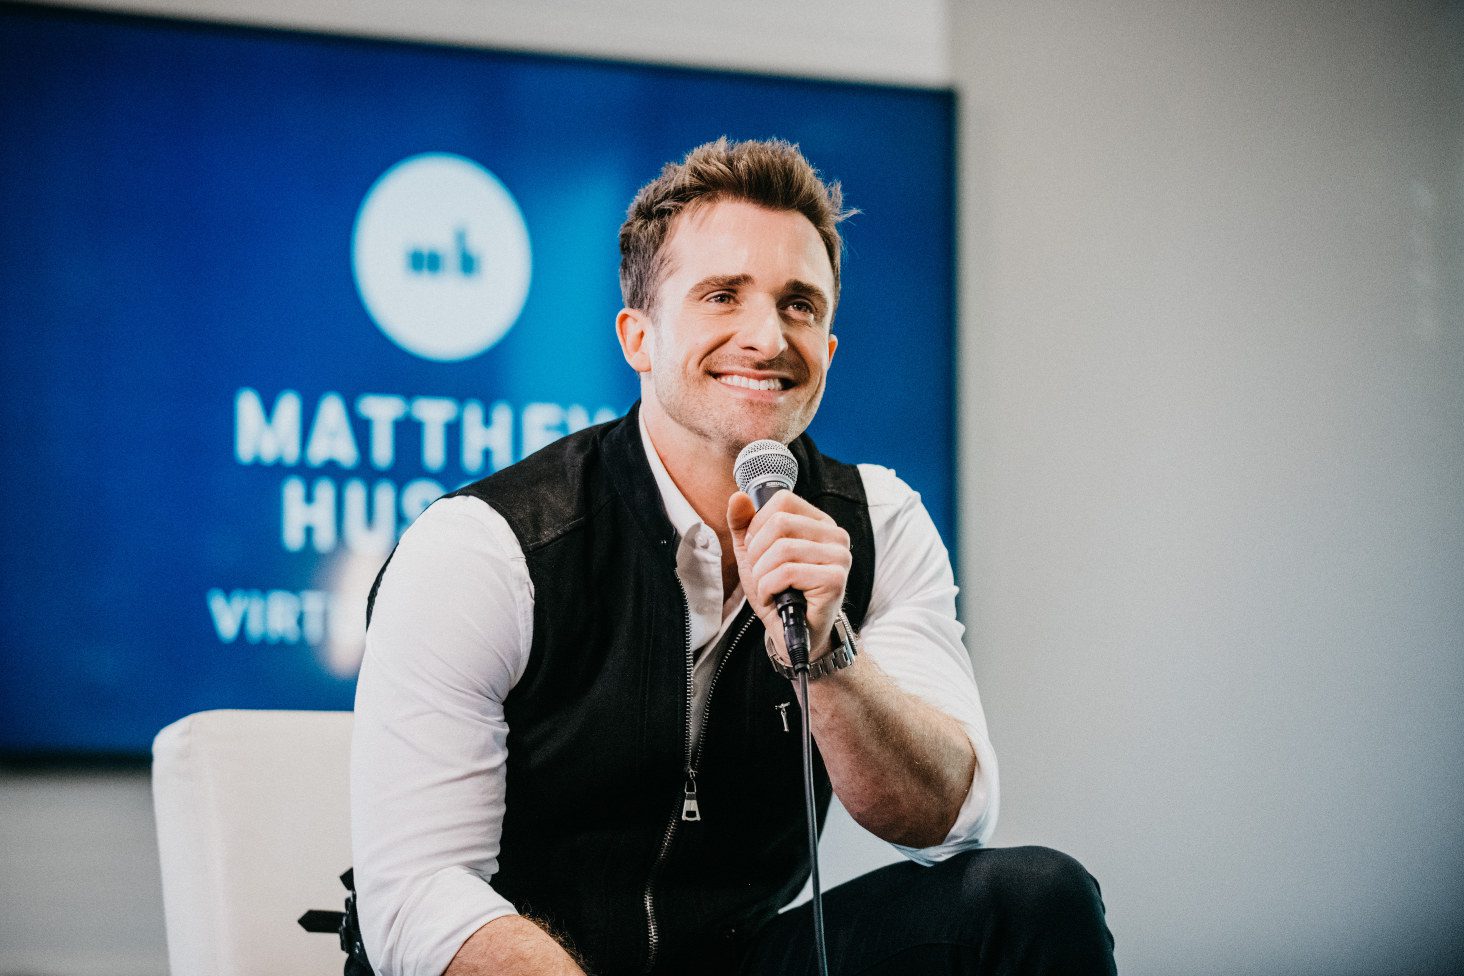 Matthew Hussey interview with microphone